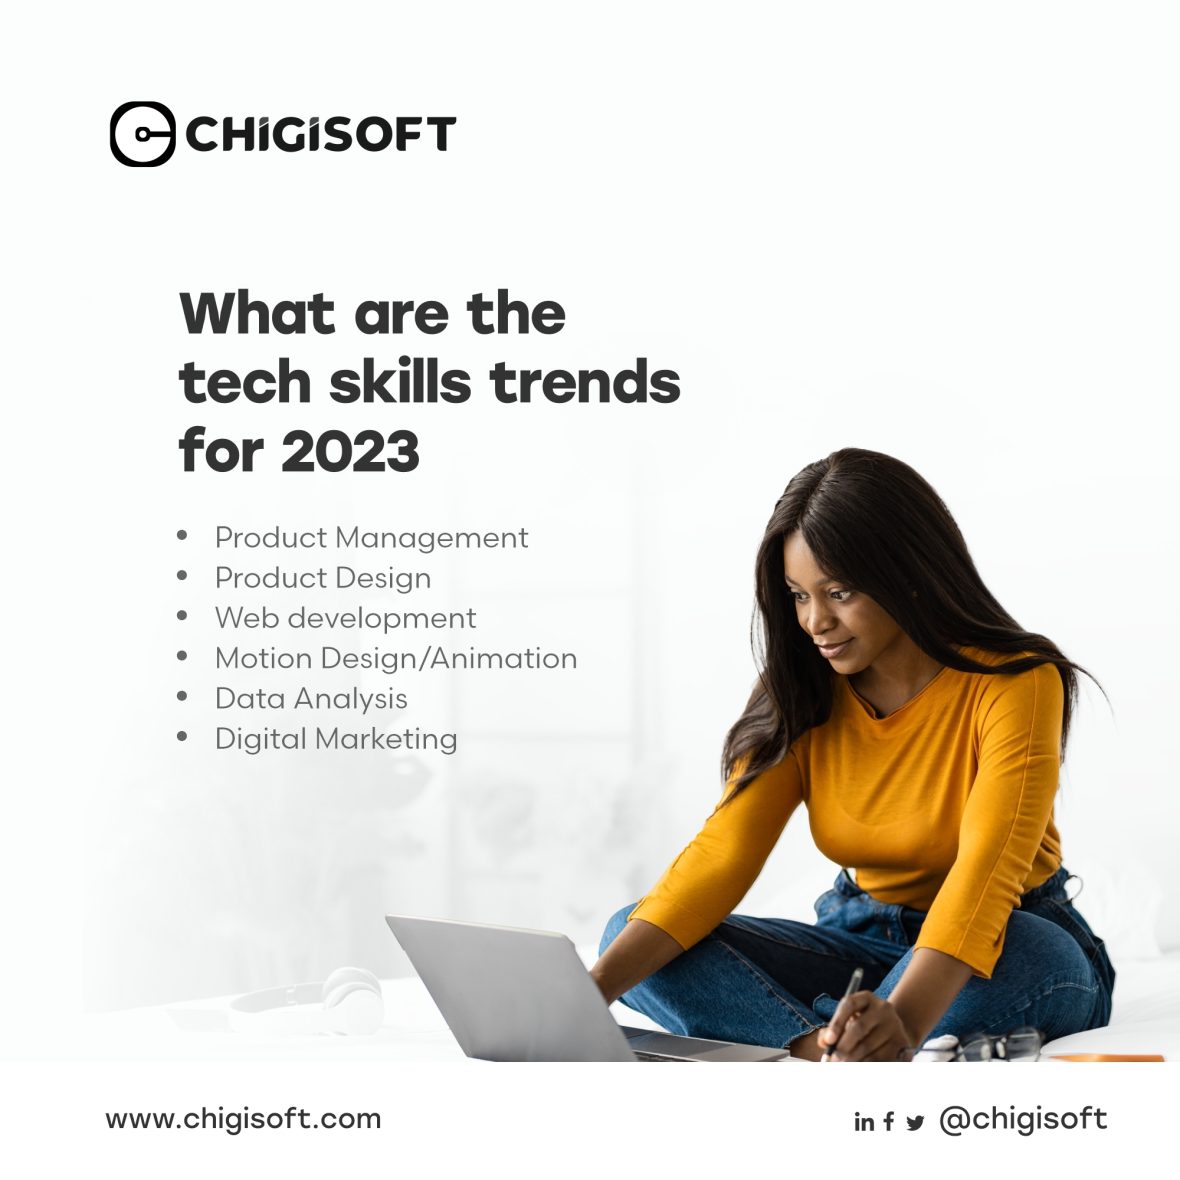 These tech skills are the most sort after by industries in 2023